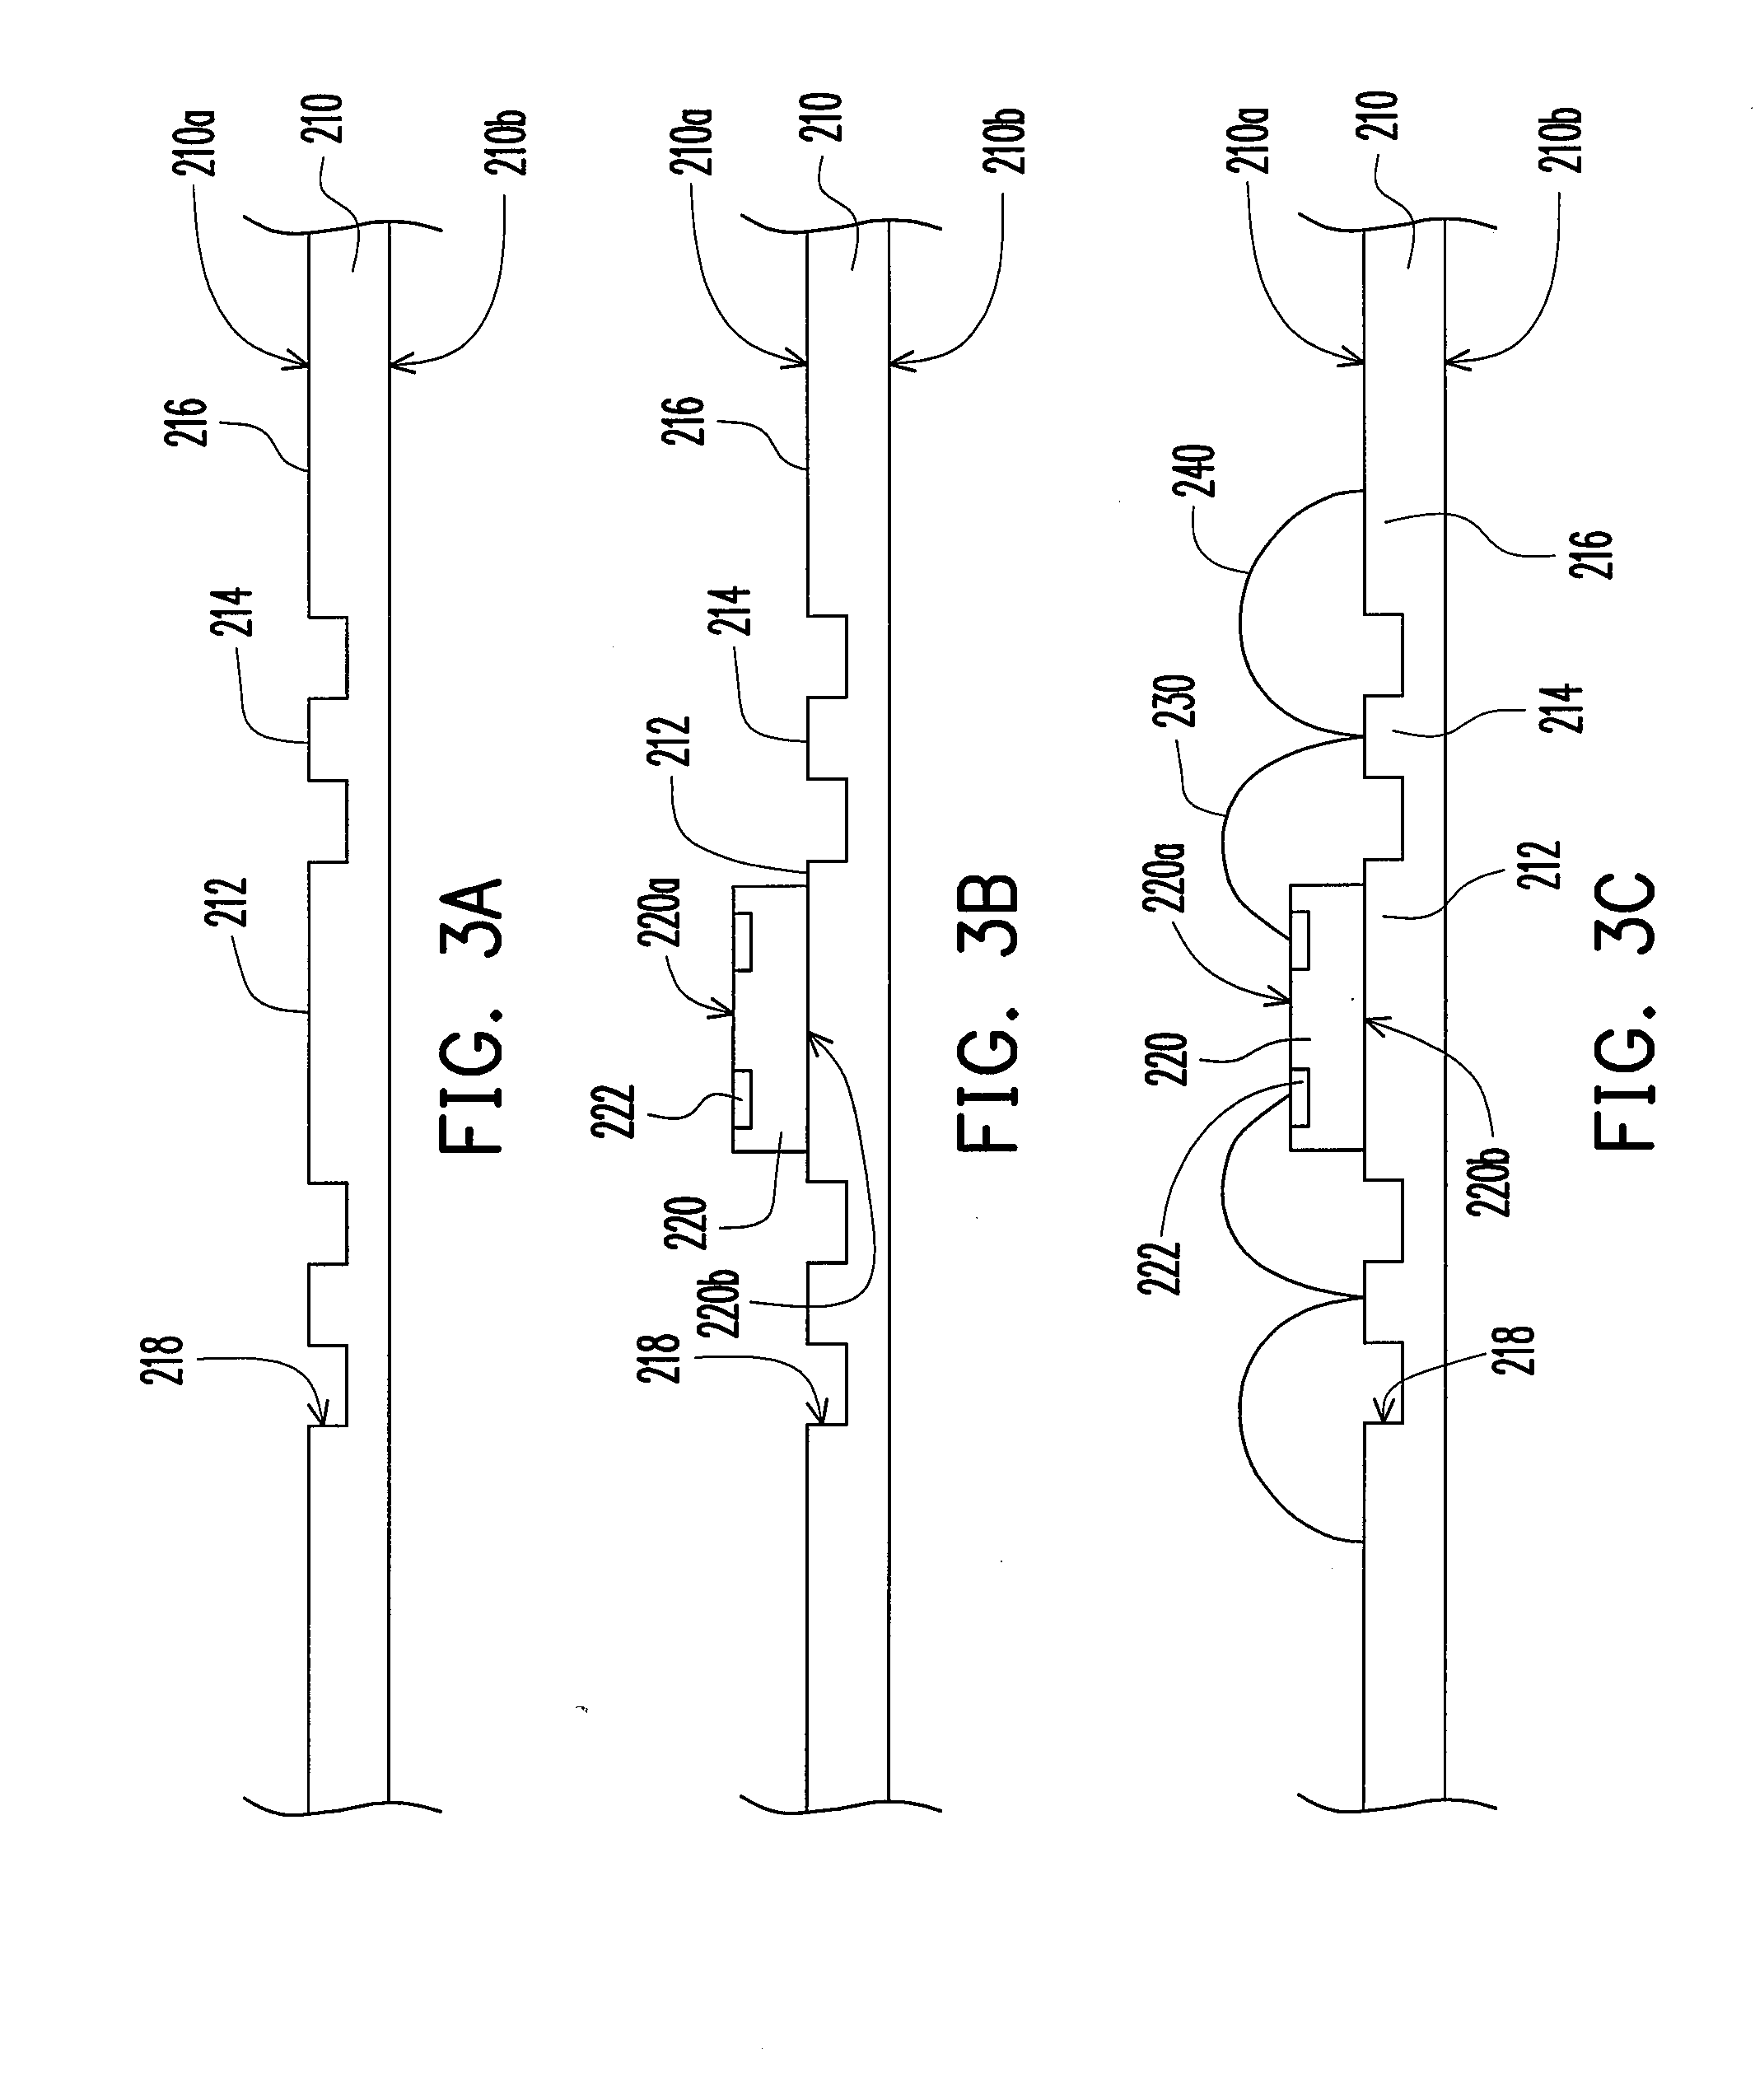 Chip package structure and method of fabricating the same